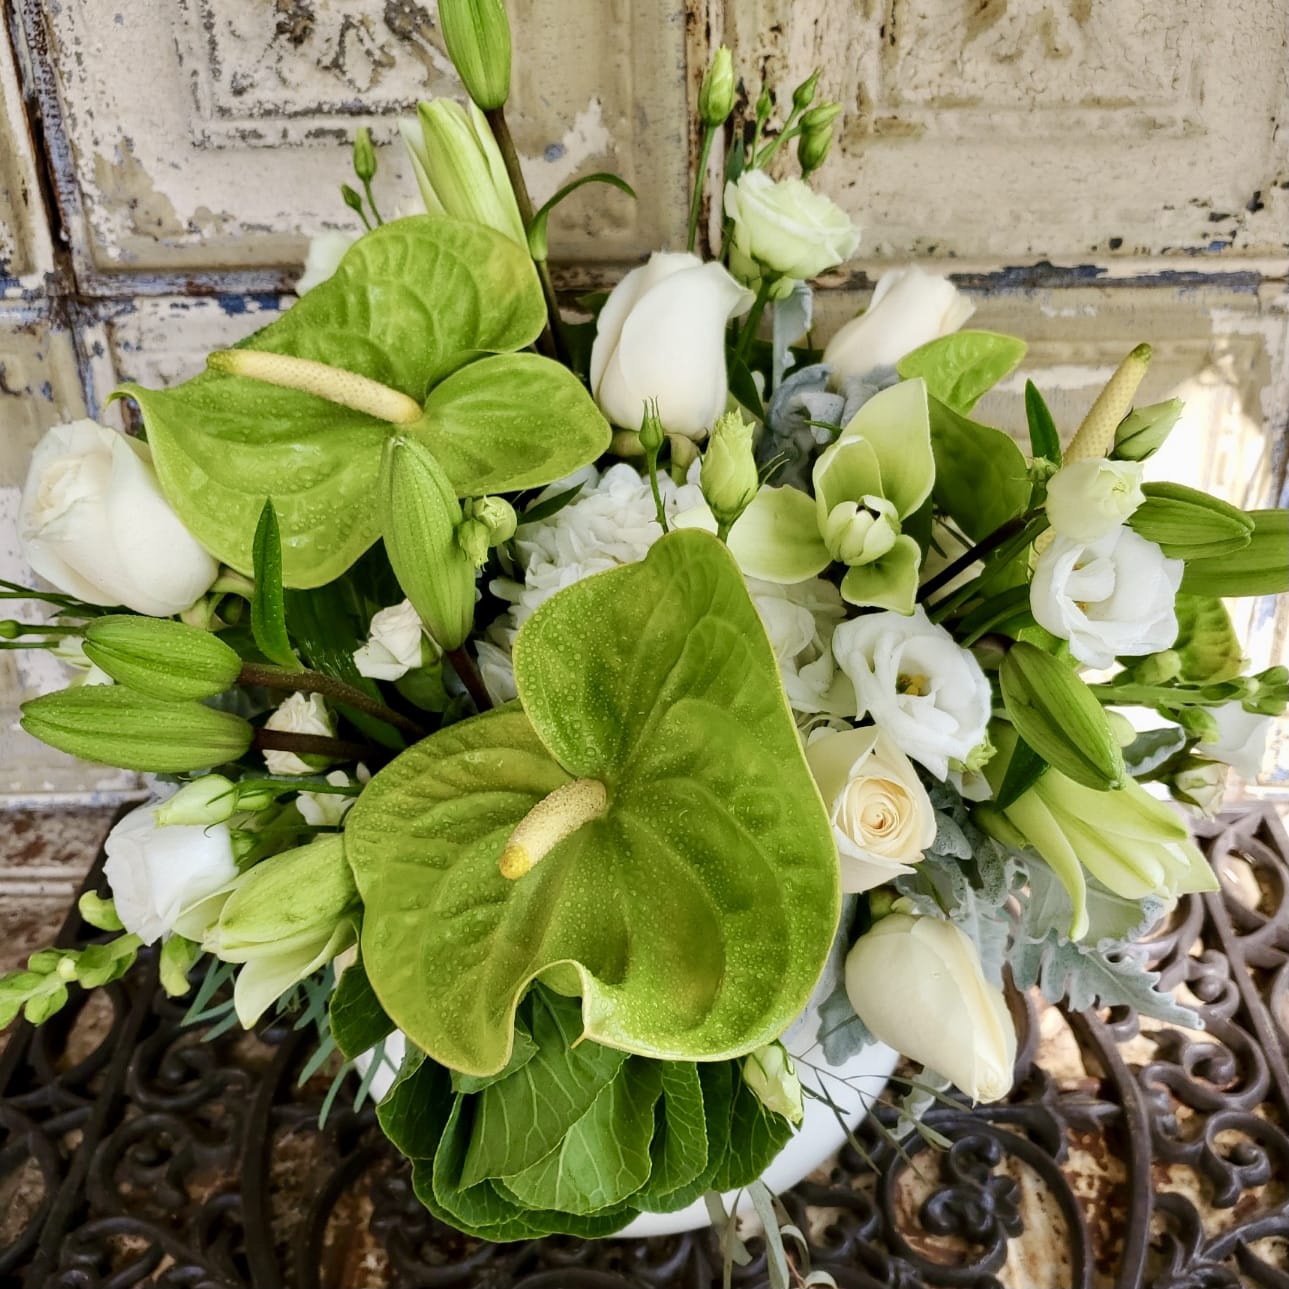 George Washington - Try a unique green and white arrangement of anthurium, roses, lilies, hydrangeas, lisianthus, and dusty miller. 